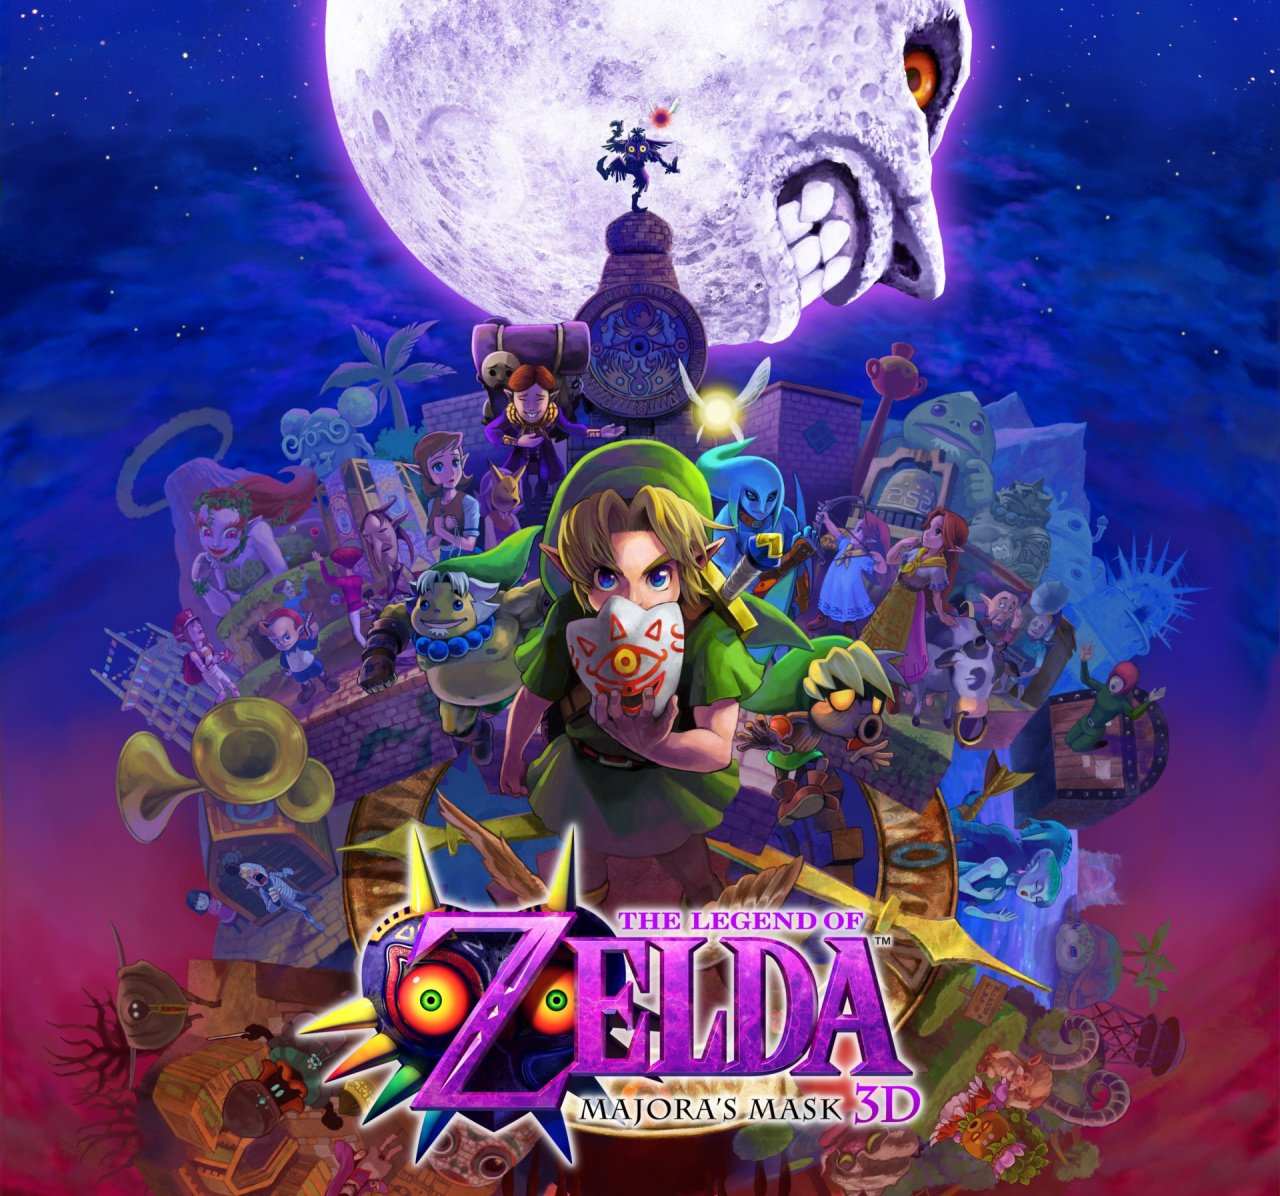 The Majora's Mask 3D Reveal Showed Nintendo Can Still Surprise and - Talking Point | Nintendo Life